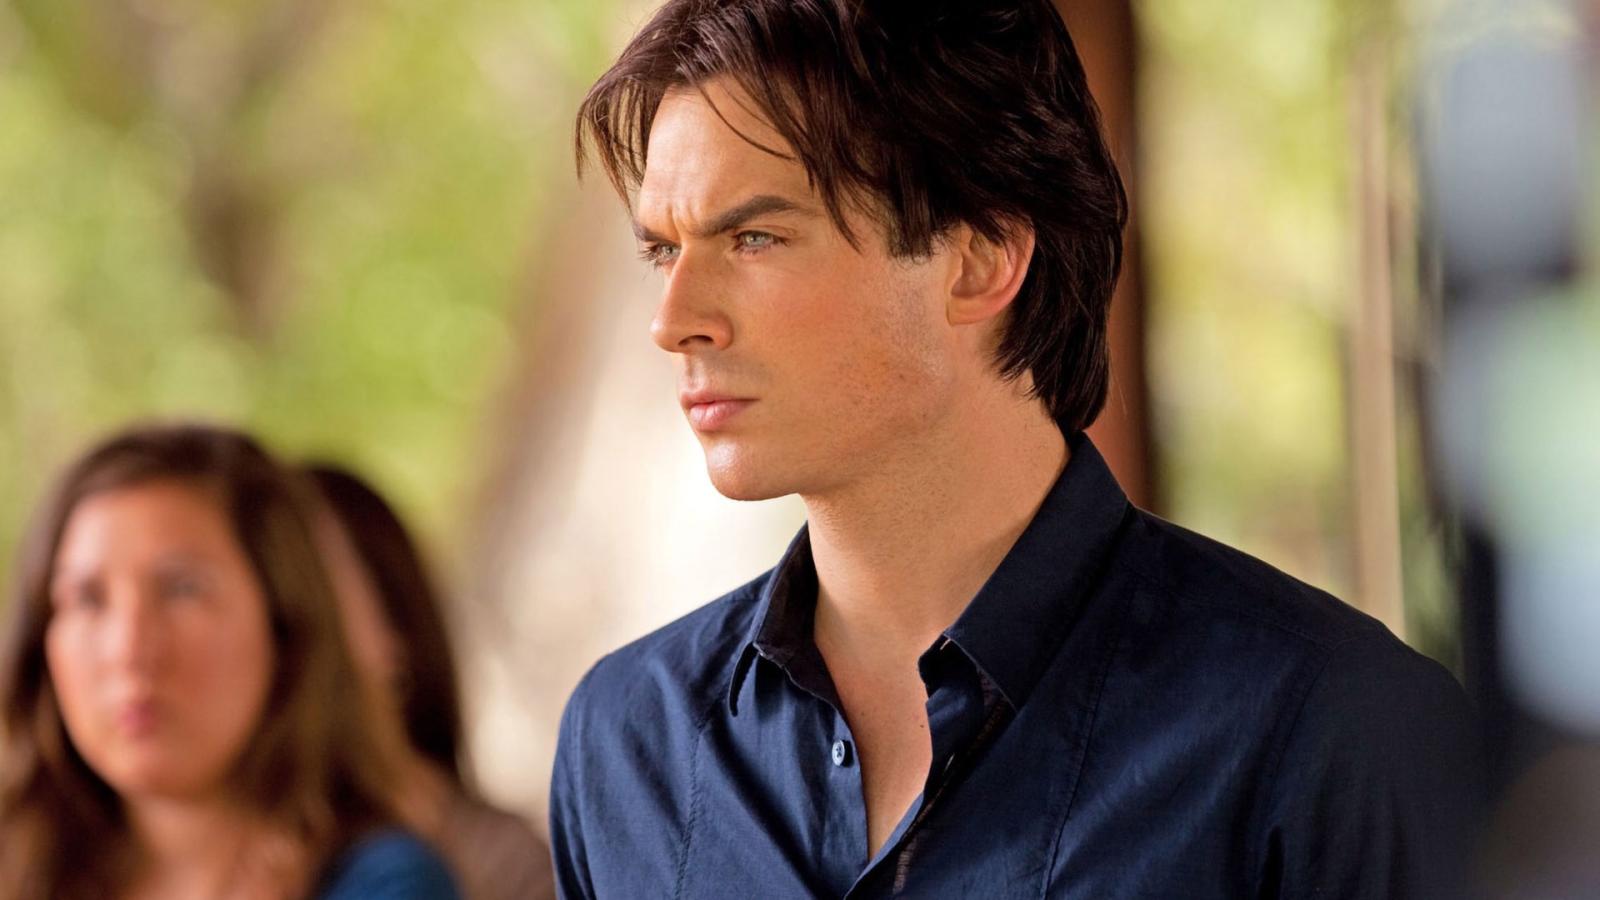 Vampire Diaries Characters vs Cast Real Age Raises Some Eyebrows - image 3